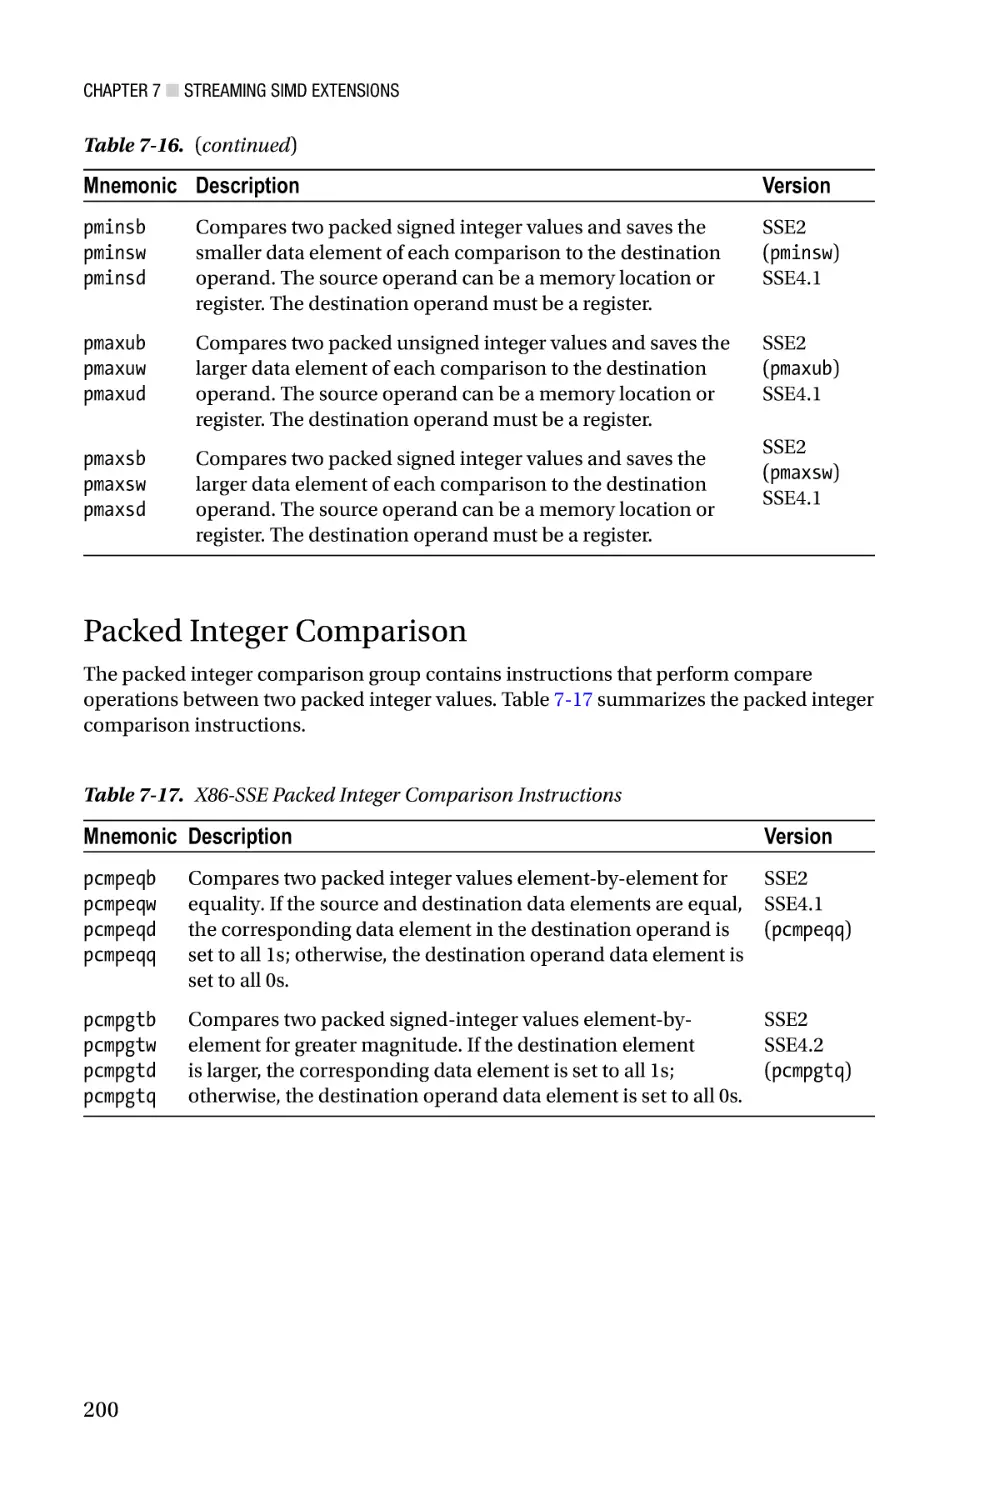 Packed Integer Comparison